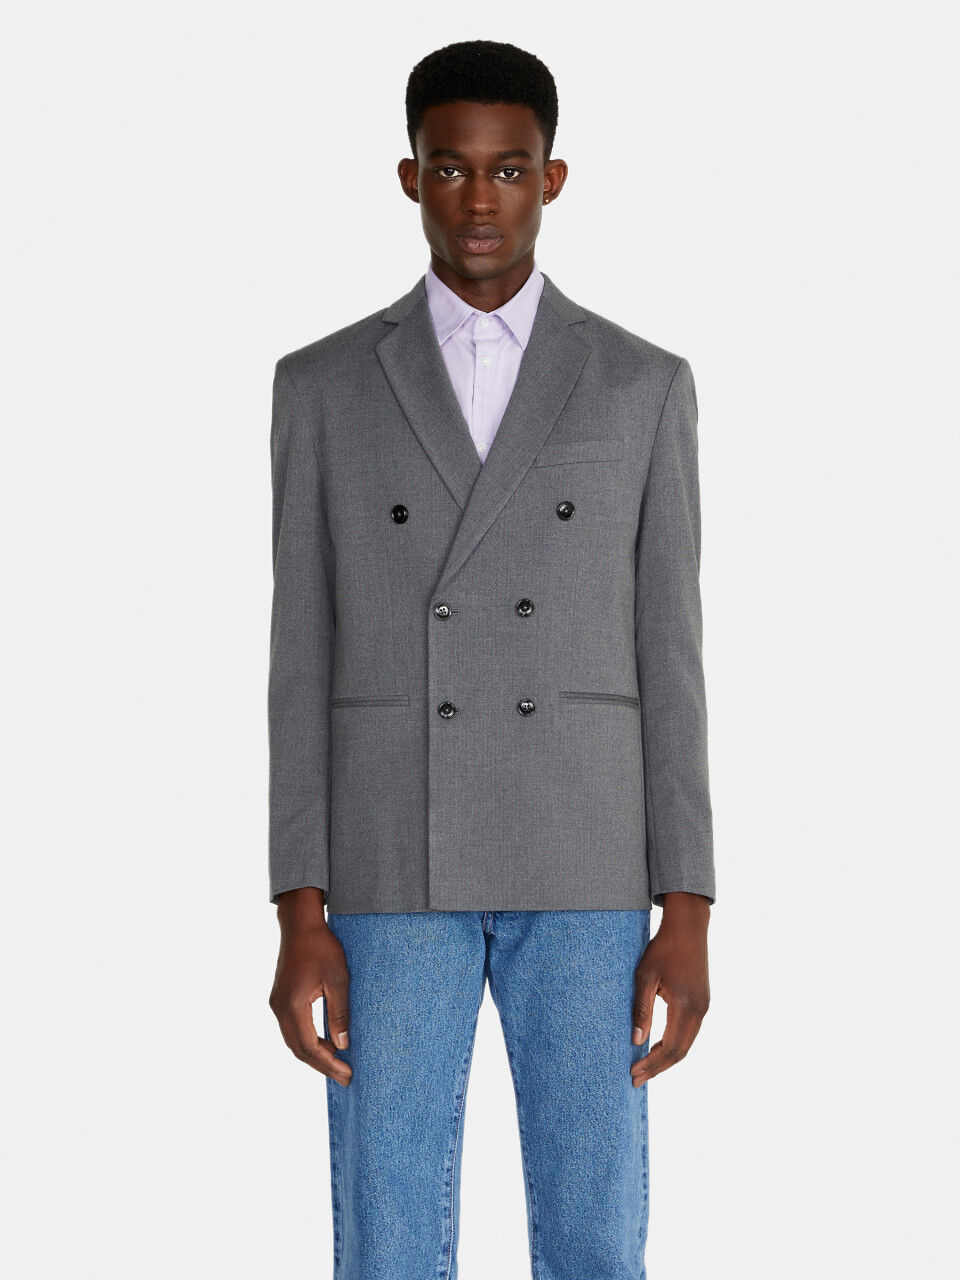 Relaxed fit double-breasted jacket